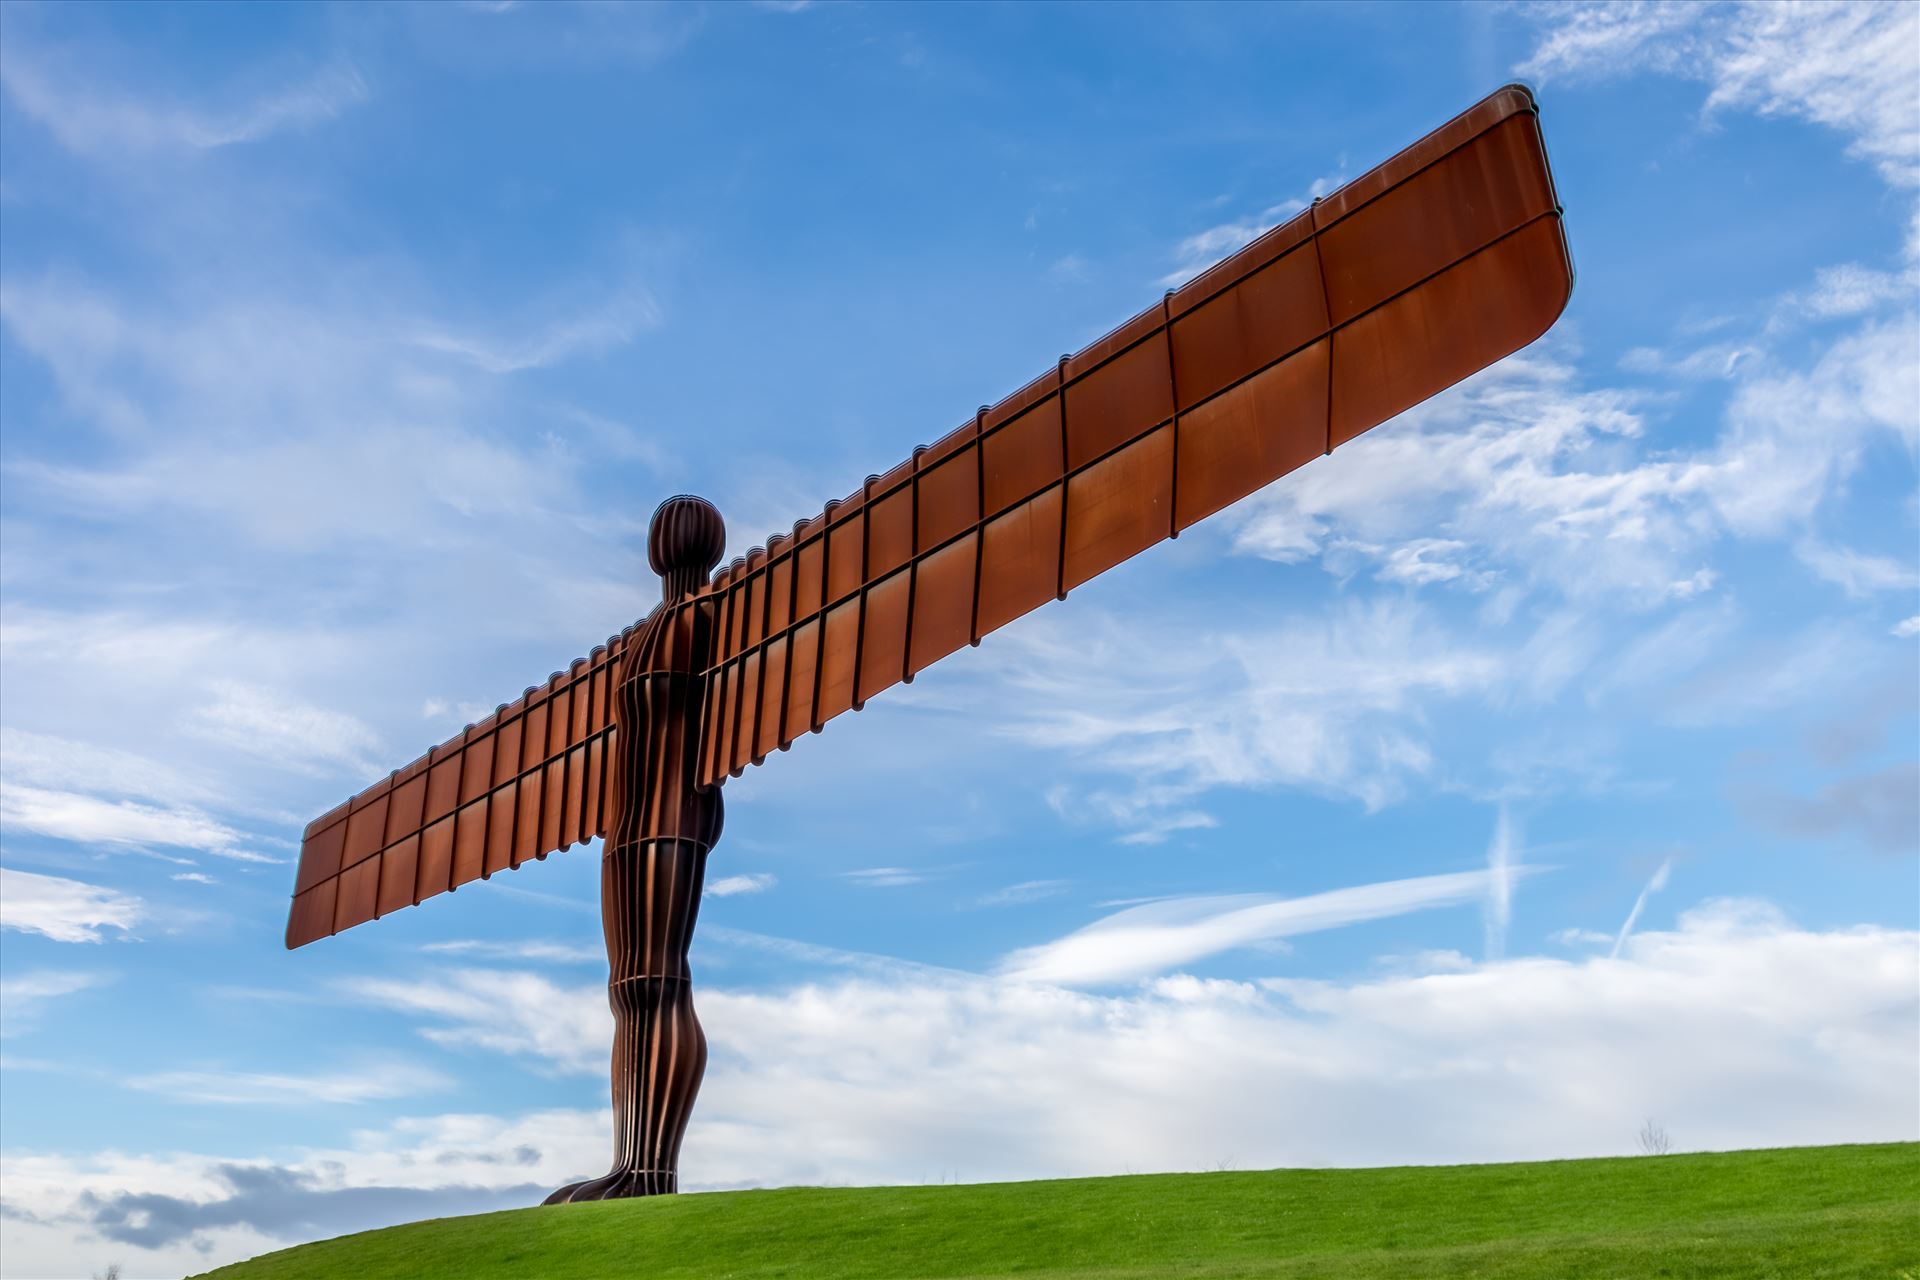 The Angel of the North The Angel of the North is a contemporary sculpture, designed by Antony Gormley, located in Gateshead,  England.Completed in 1998, it is a steel sculpture of an angel, 20 metres (66 ft) tall, with wings measuring 54 metres (177 ft) across. by philreay